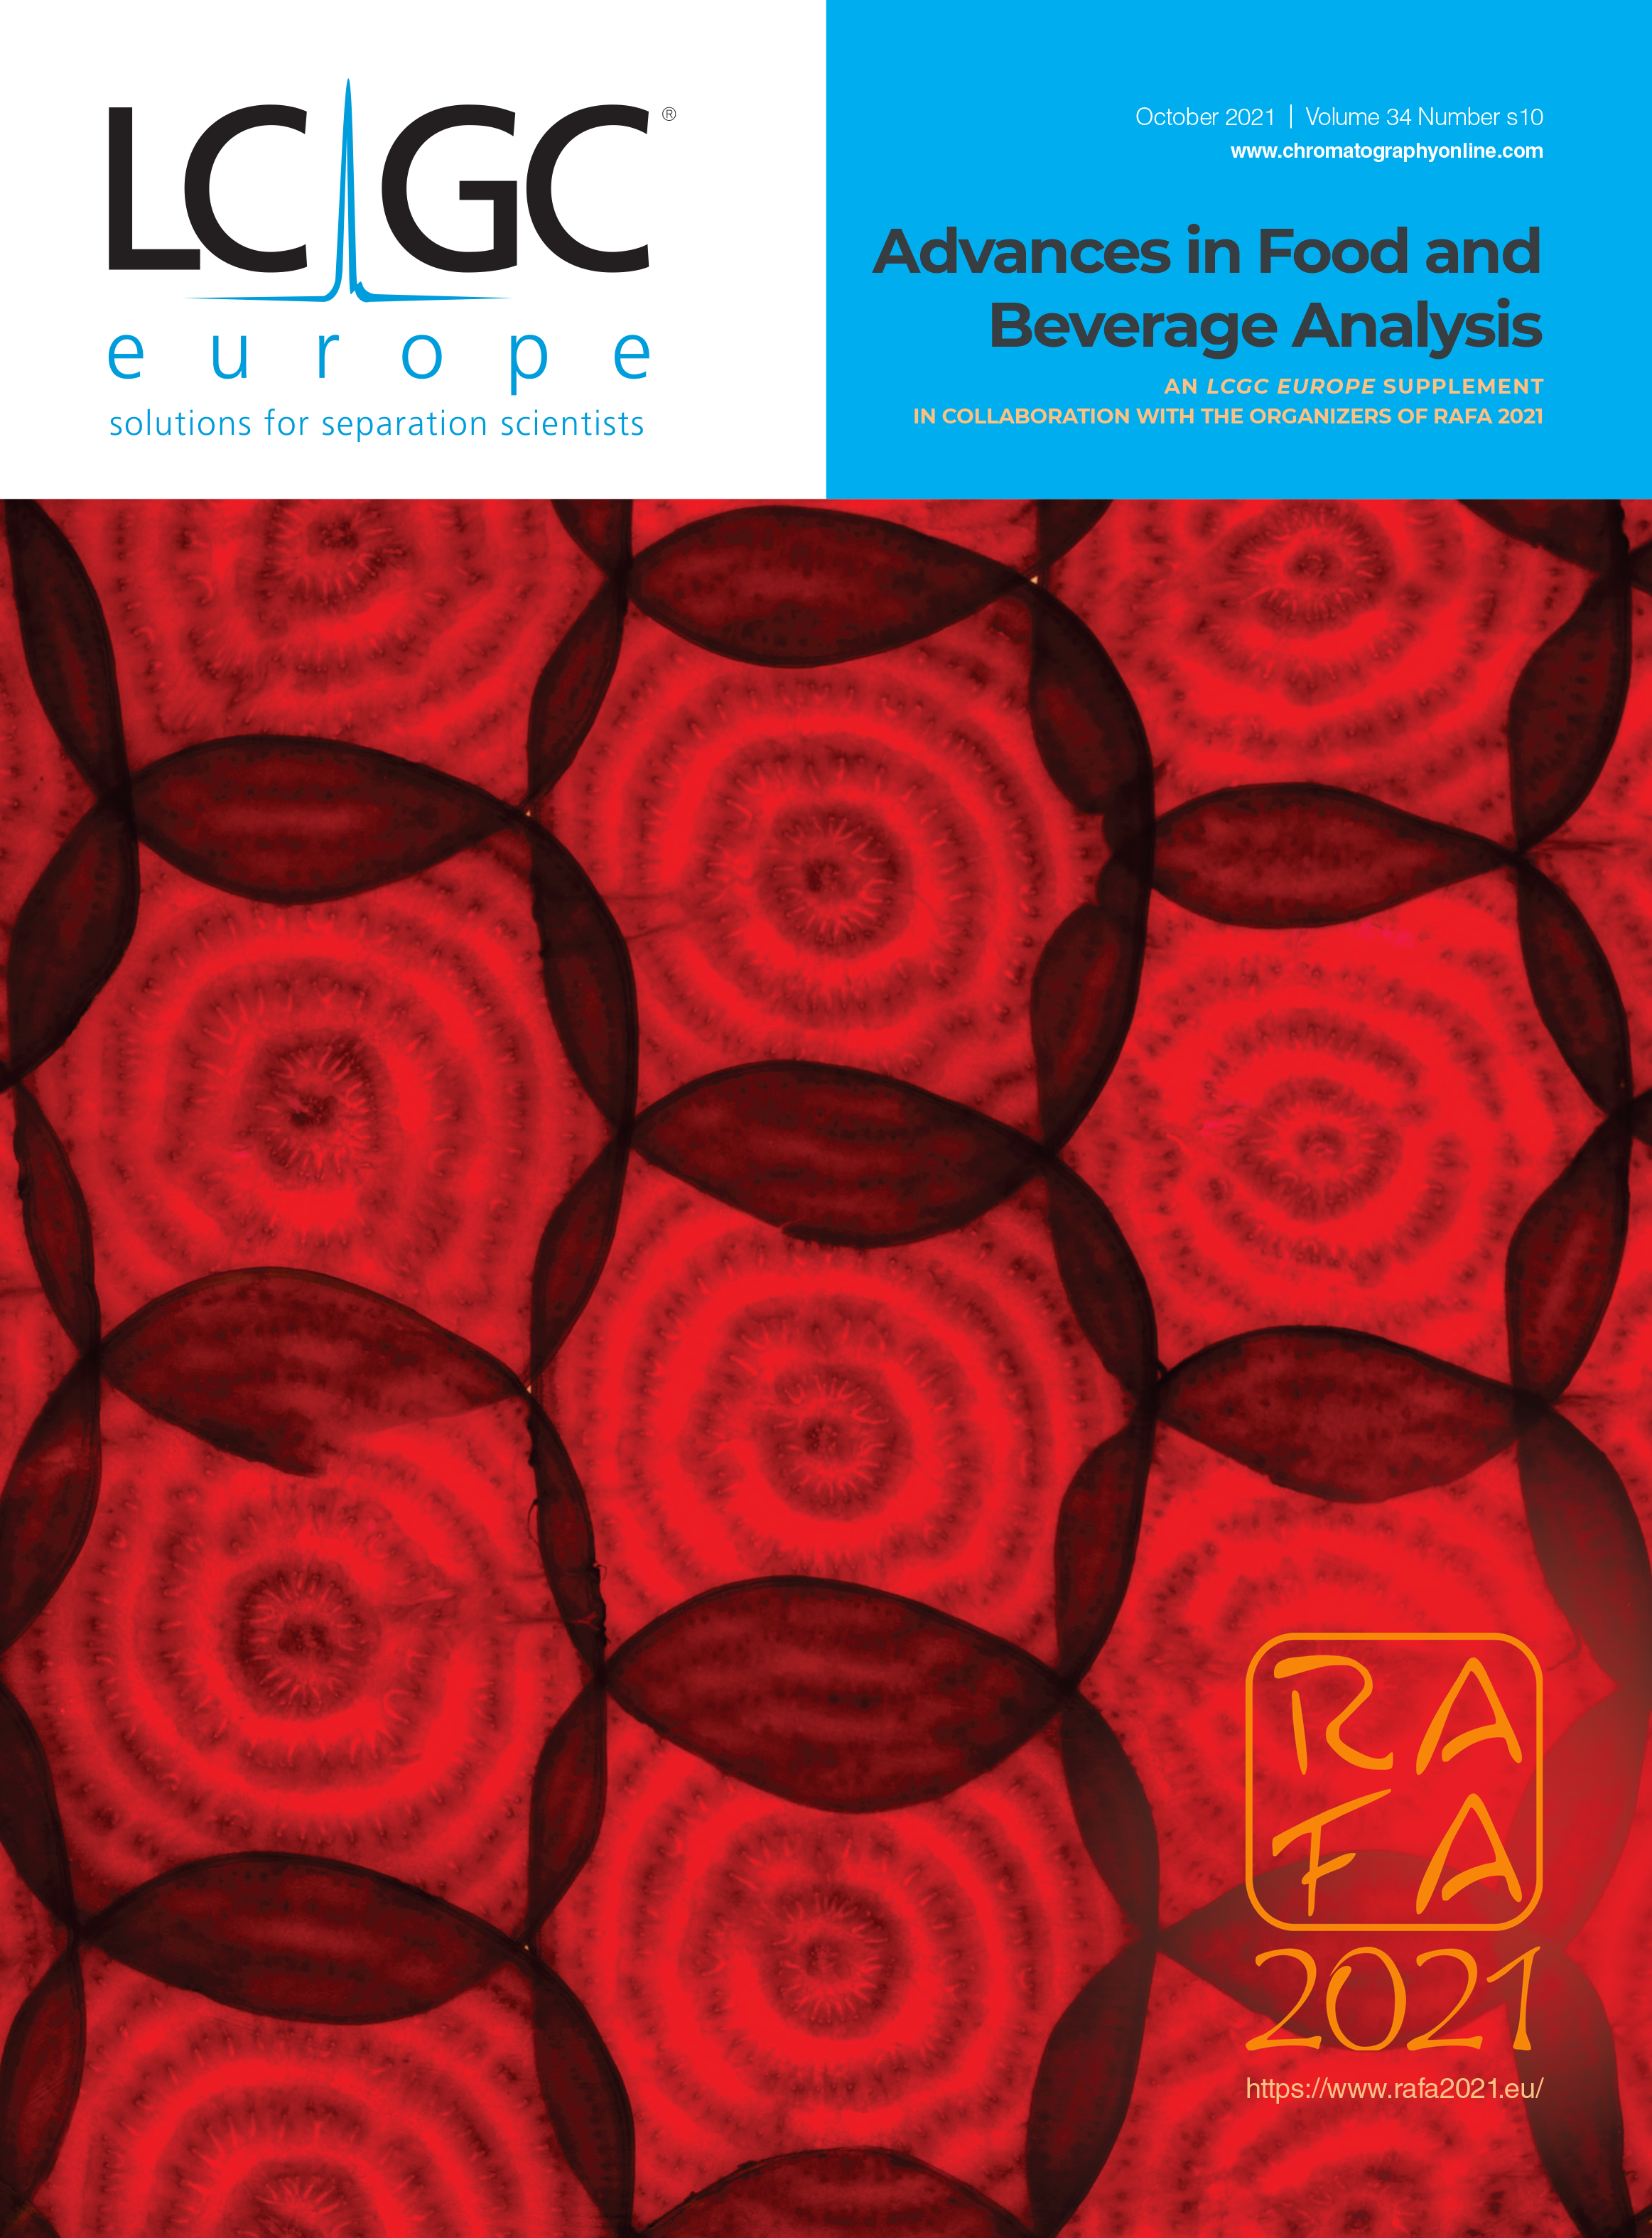 Advances in Food and Beverage Analysis